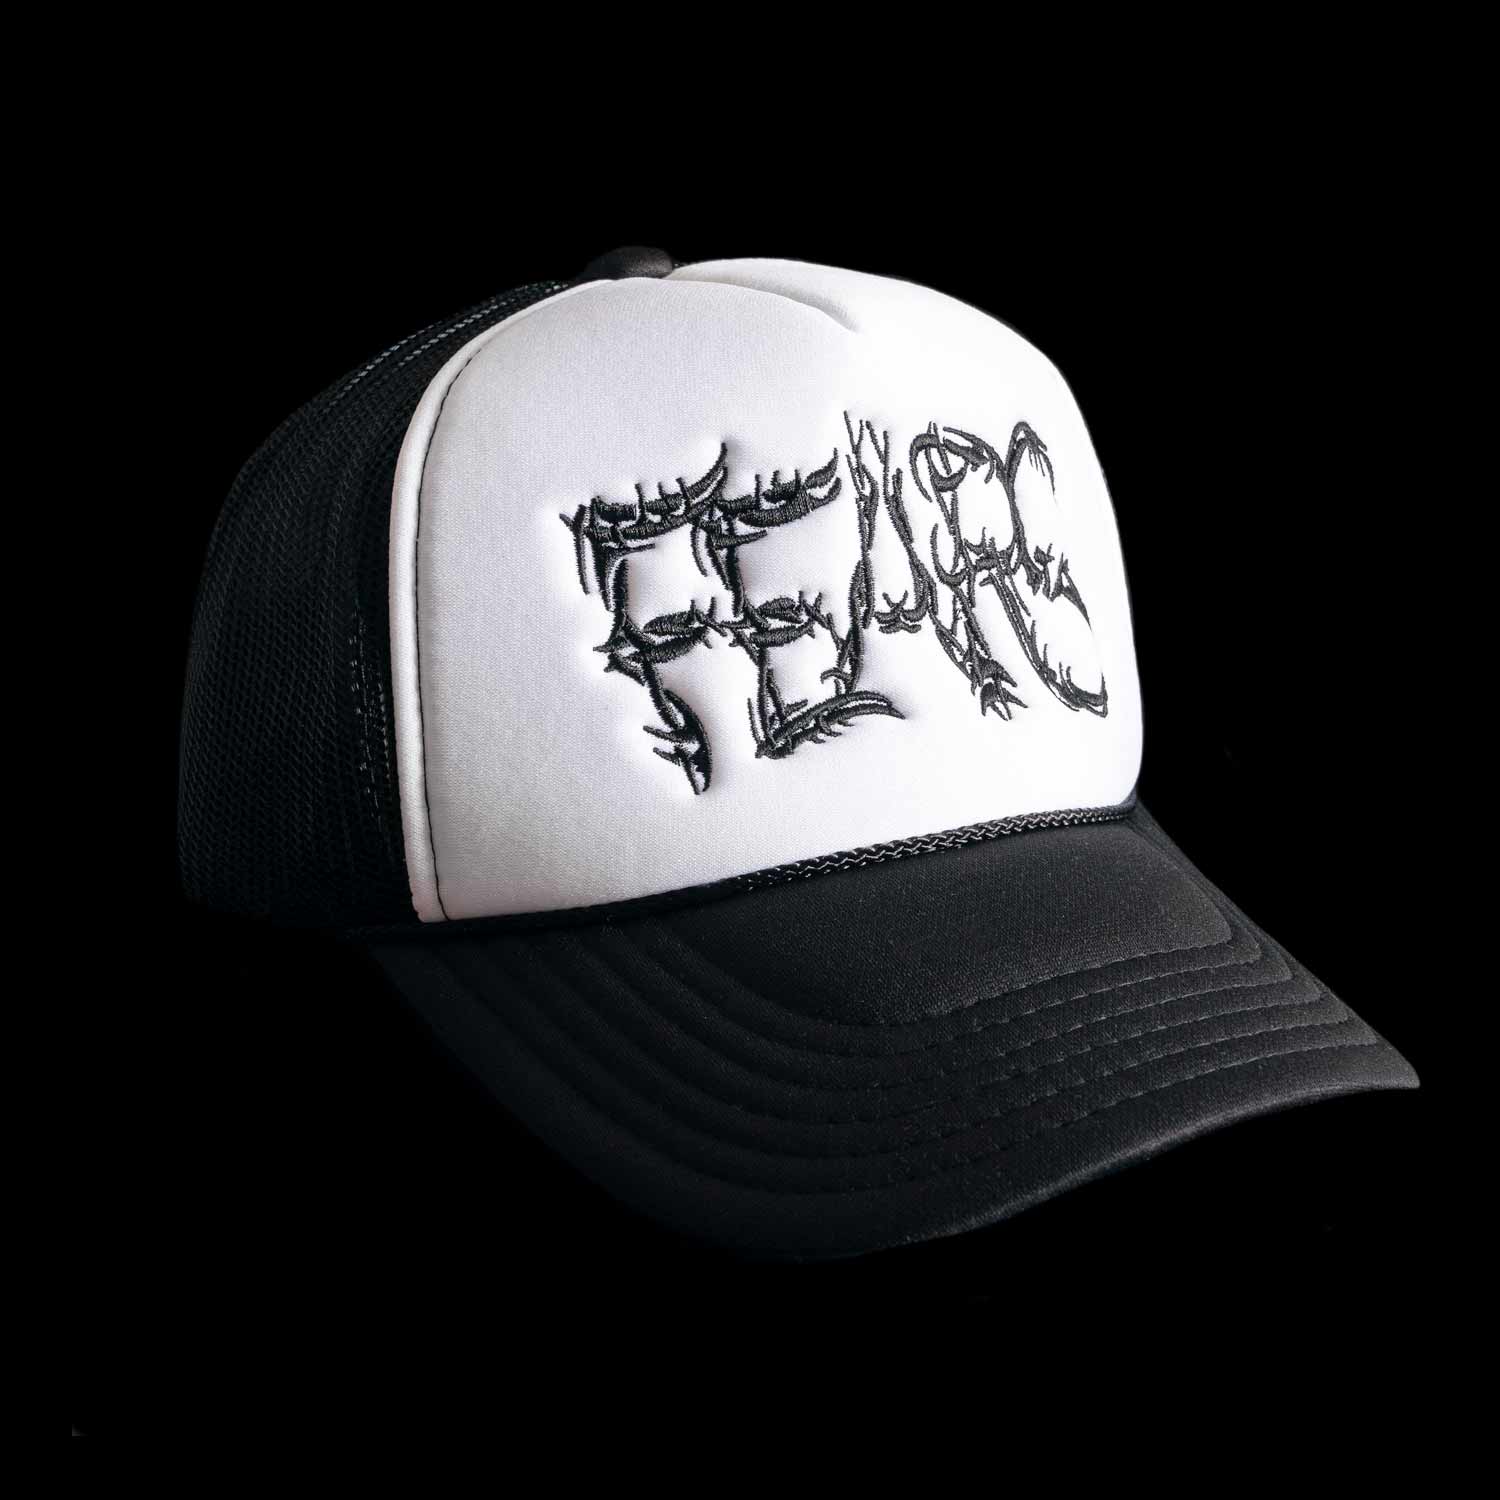 FEARS embroidered trucker hat